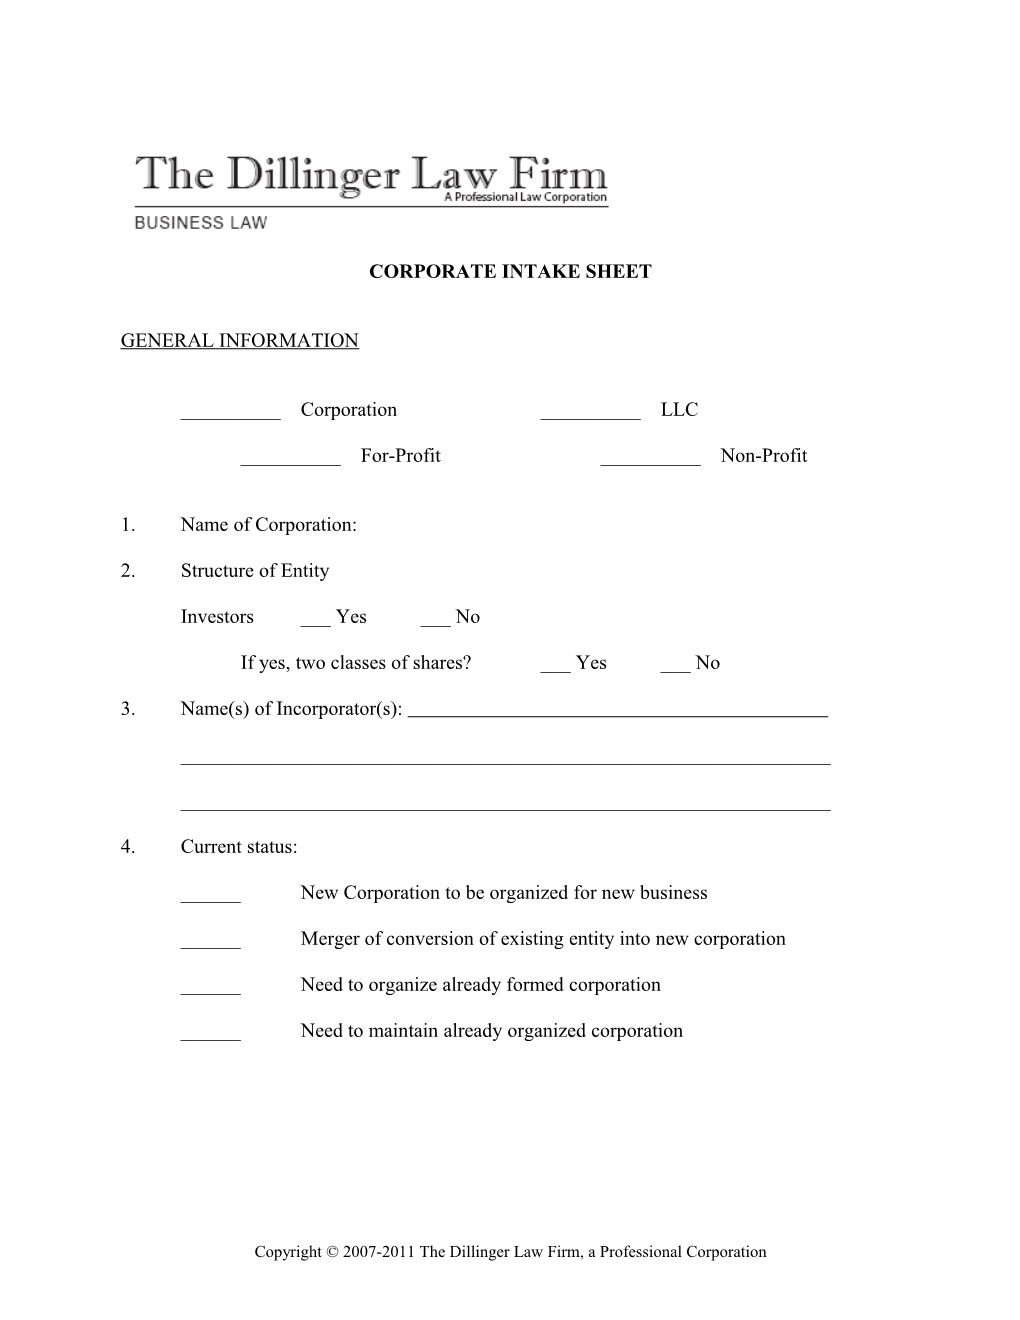 The Dillinger Law Firm